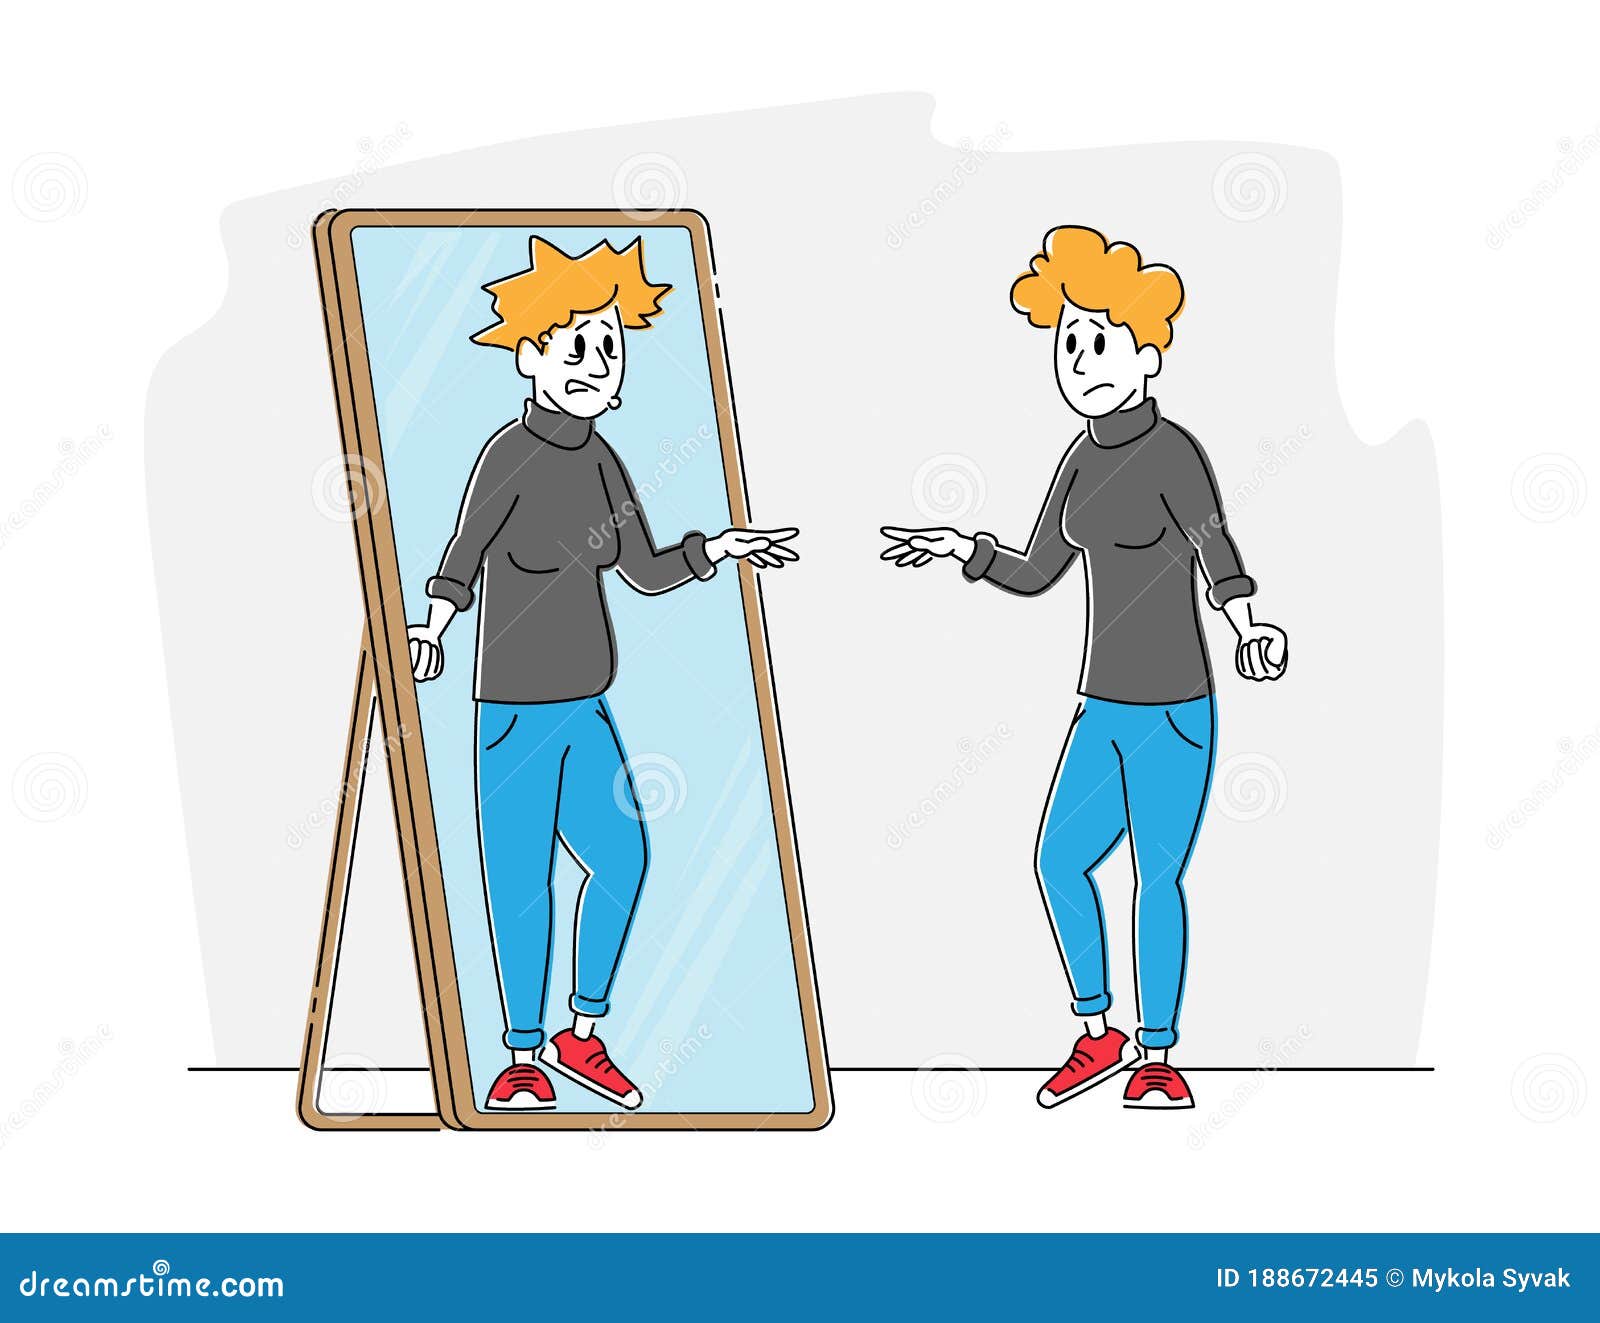 female character with low self-esteem looking at mirror see herself reflection as ugly woman with old haggard face